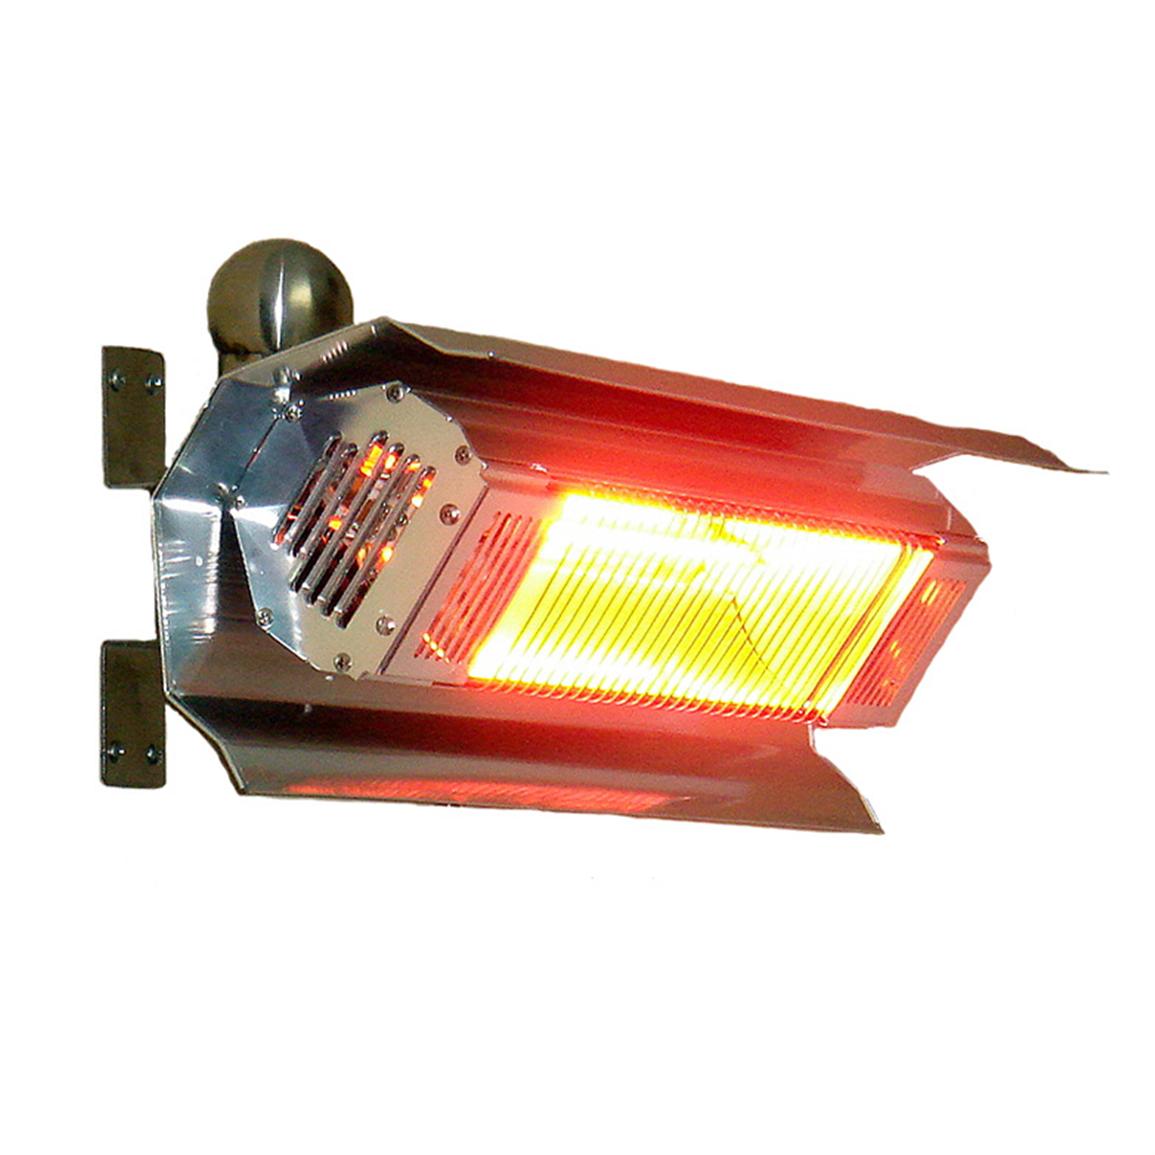 Fire Sense Stainless Steel Wall - mounted Infrared Patio Heater Stainless Steel Wall Mounted Infrared Patio Heater